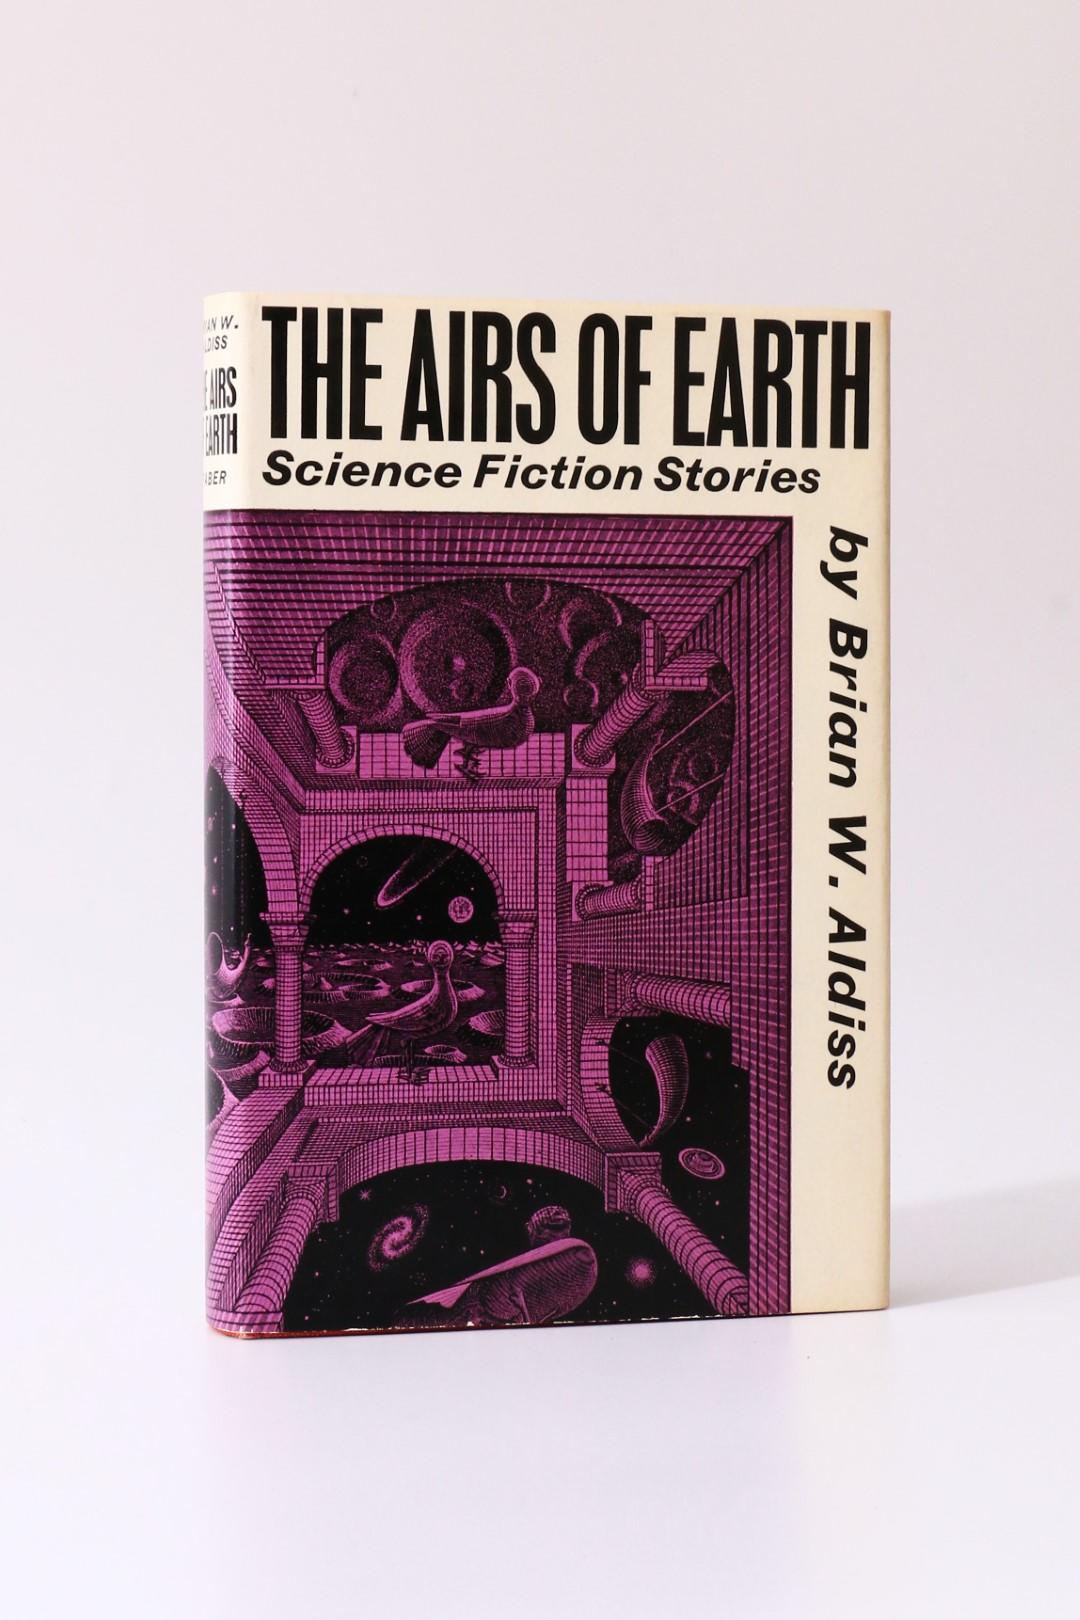 Brian W. Aldiss - The Airs of Earth - An Association Copy - Faber & Faber, 1964, Signed First Edition.